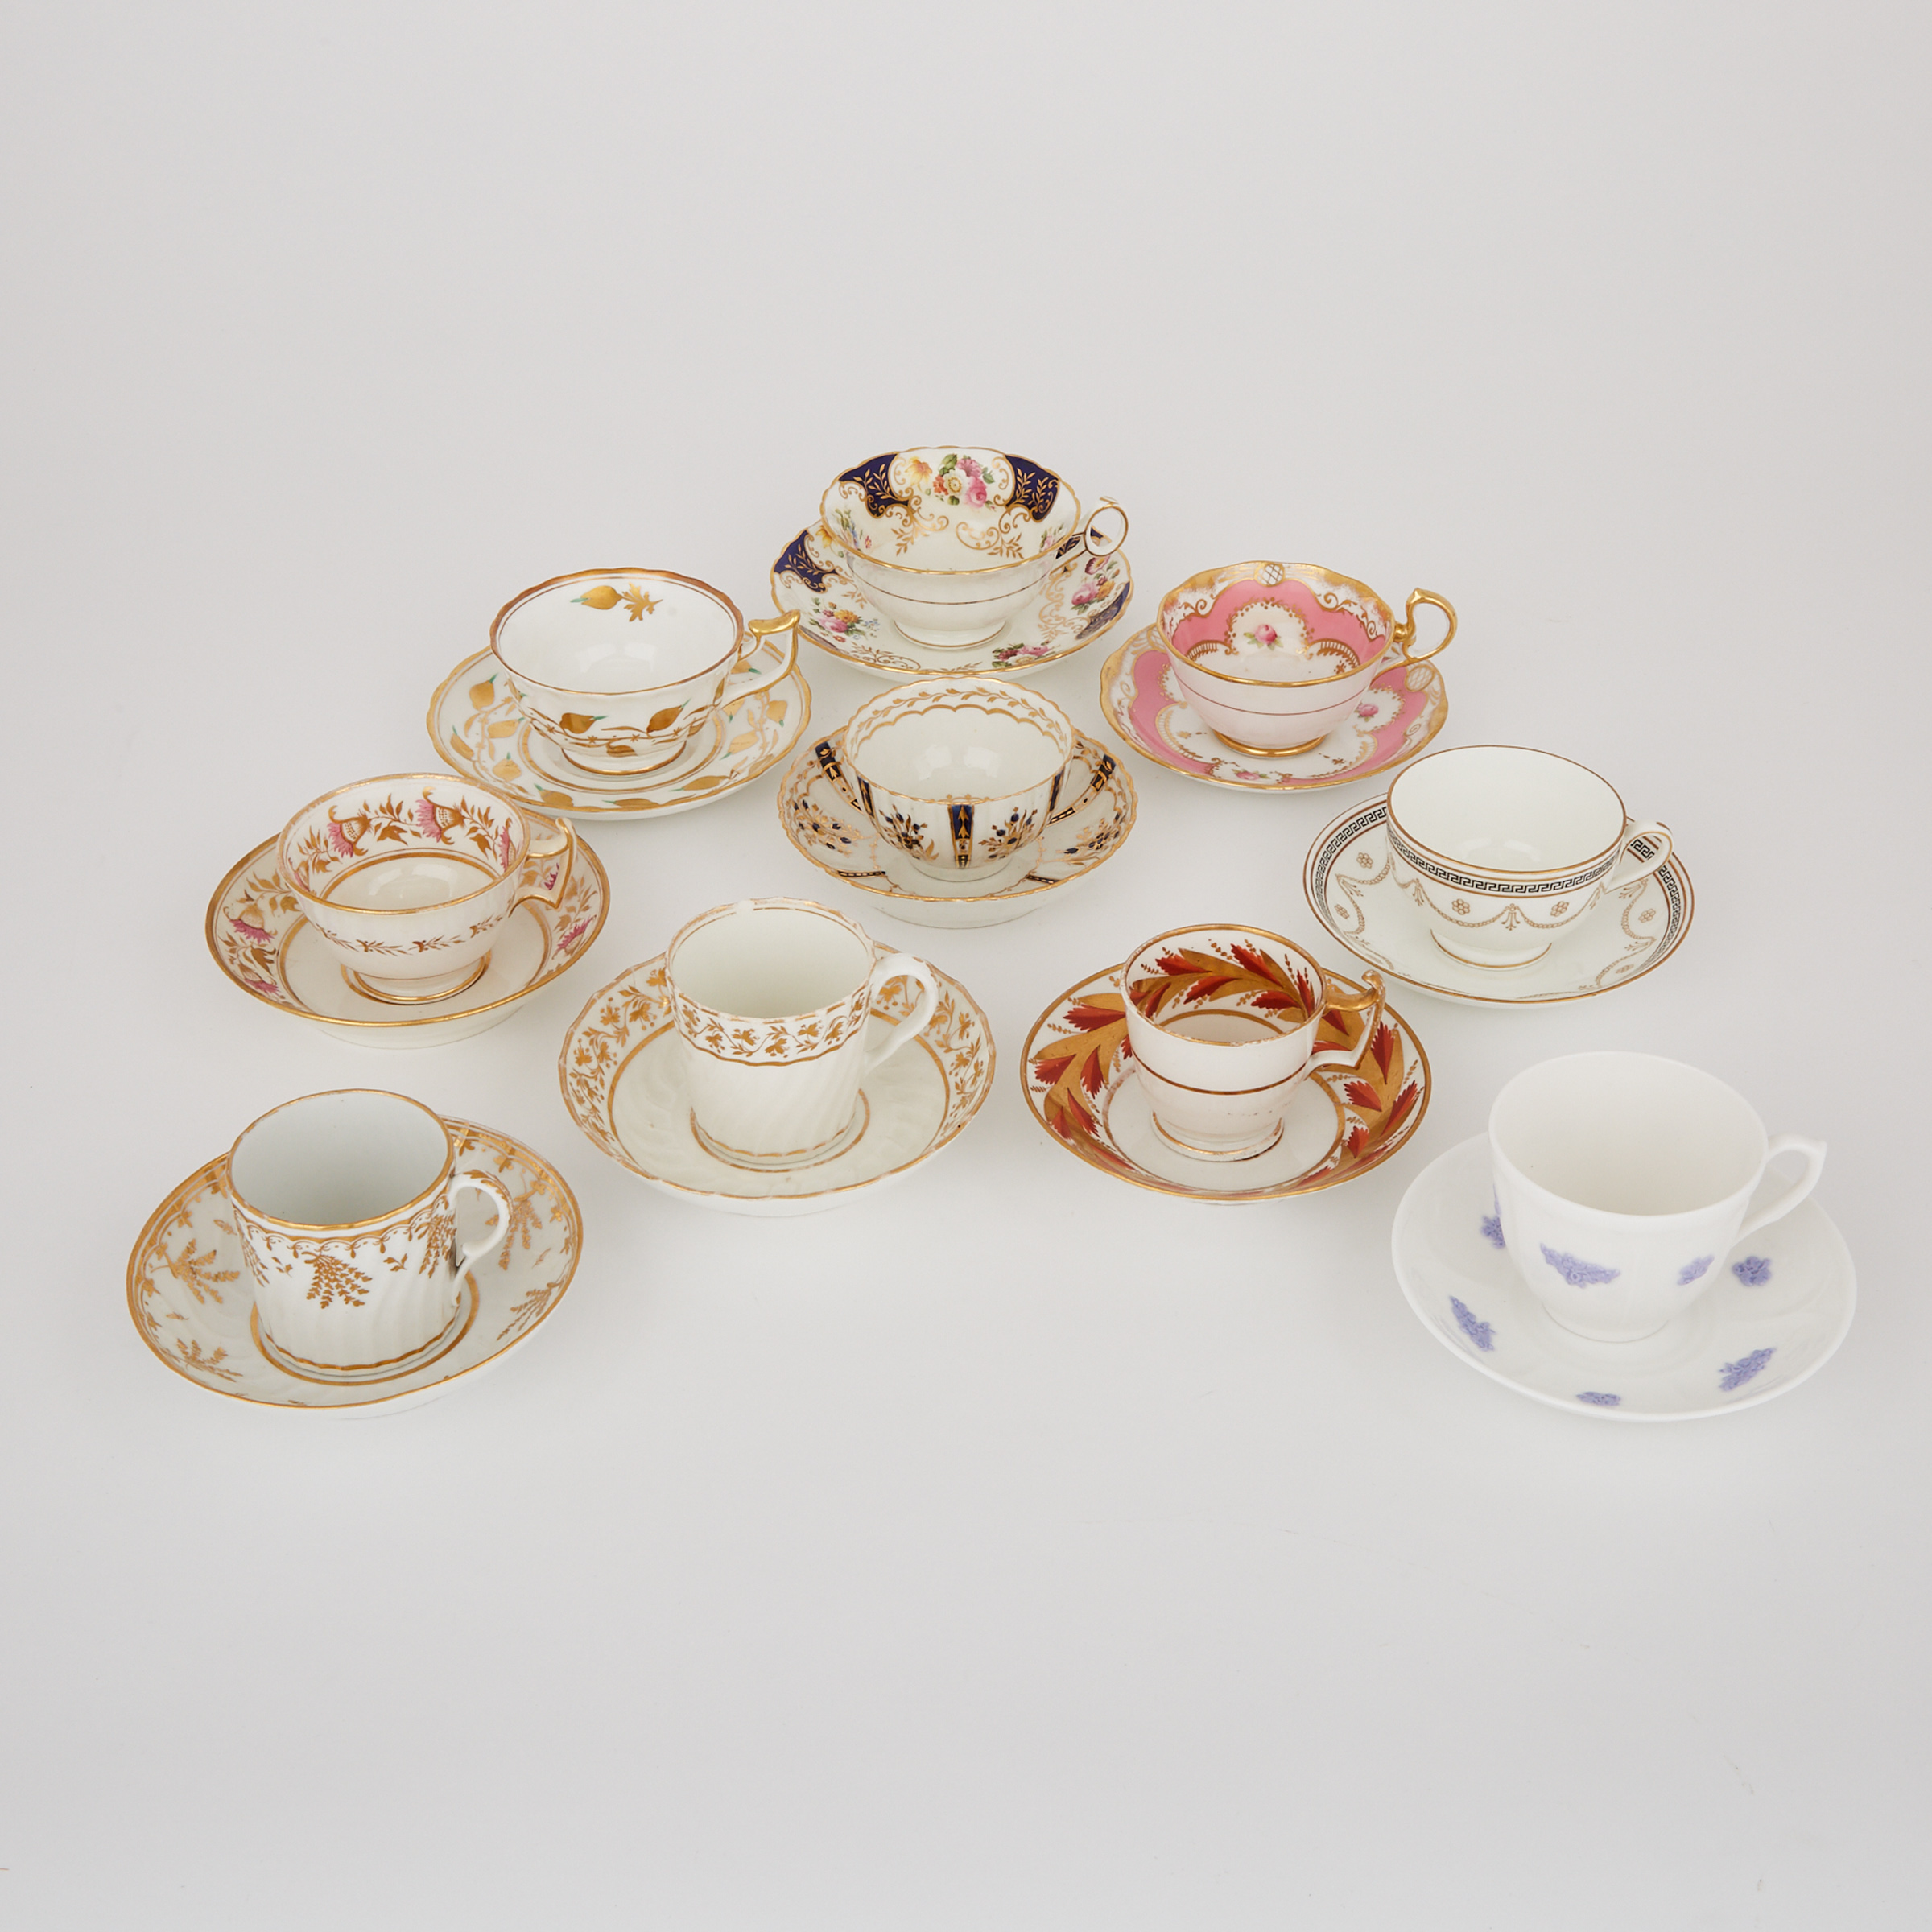 Ten English Porcelain Cups and Saucers, late 18th-early 20th century